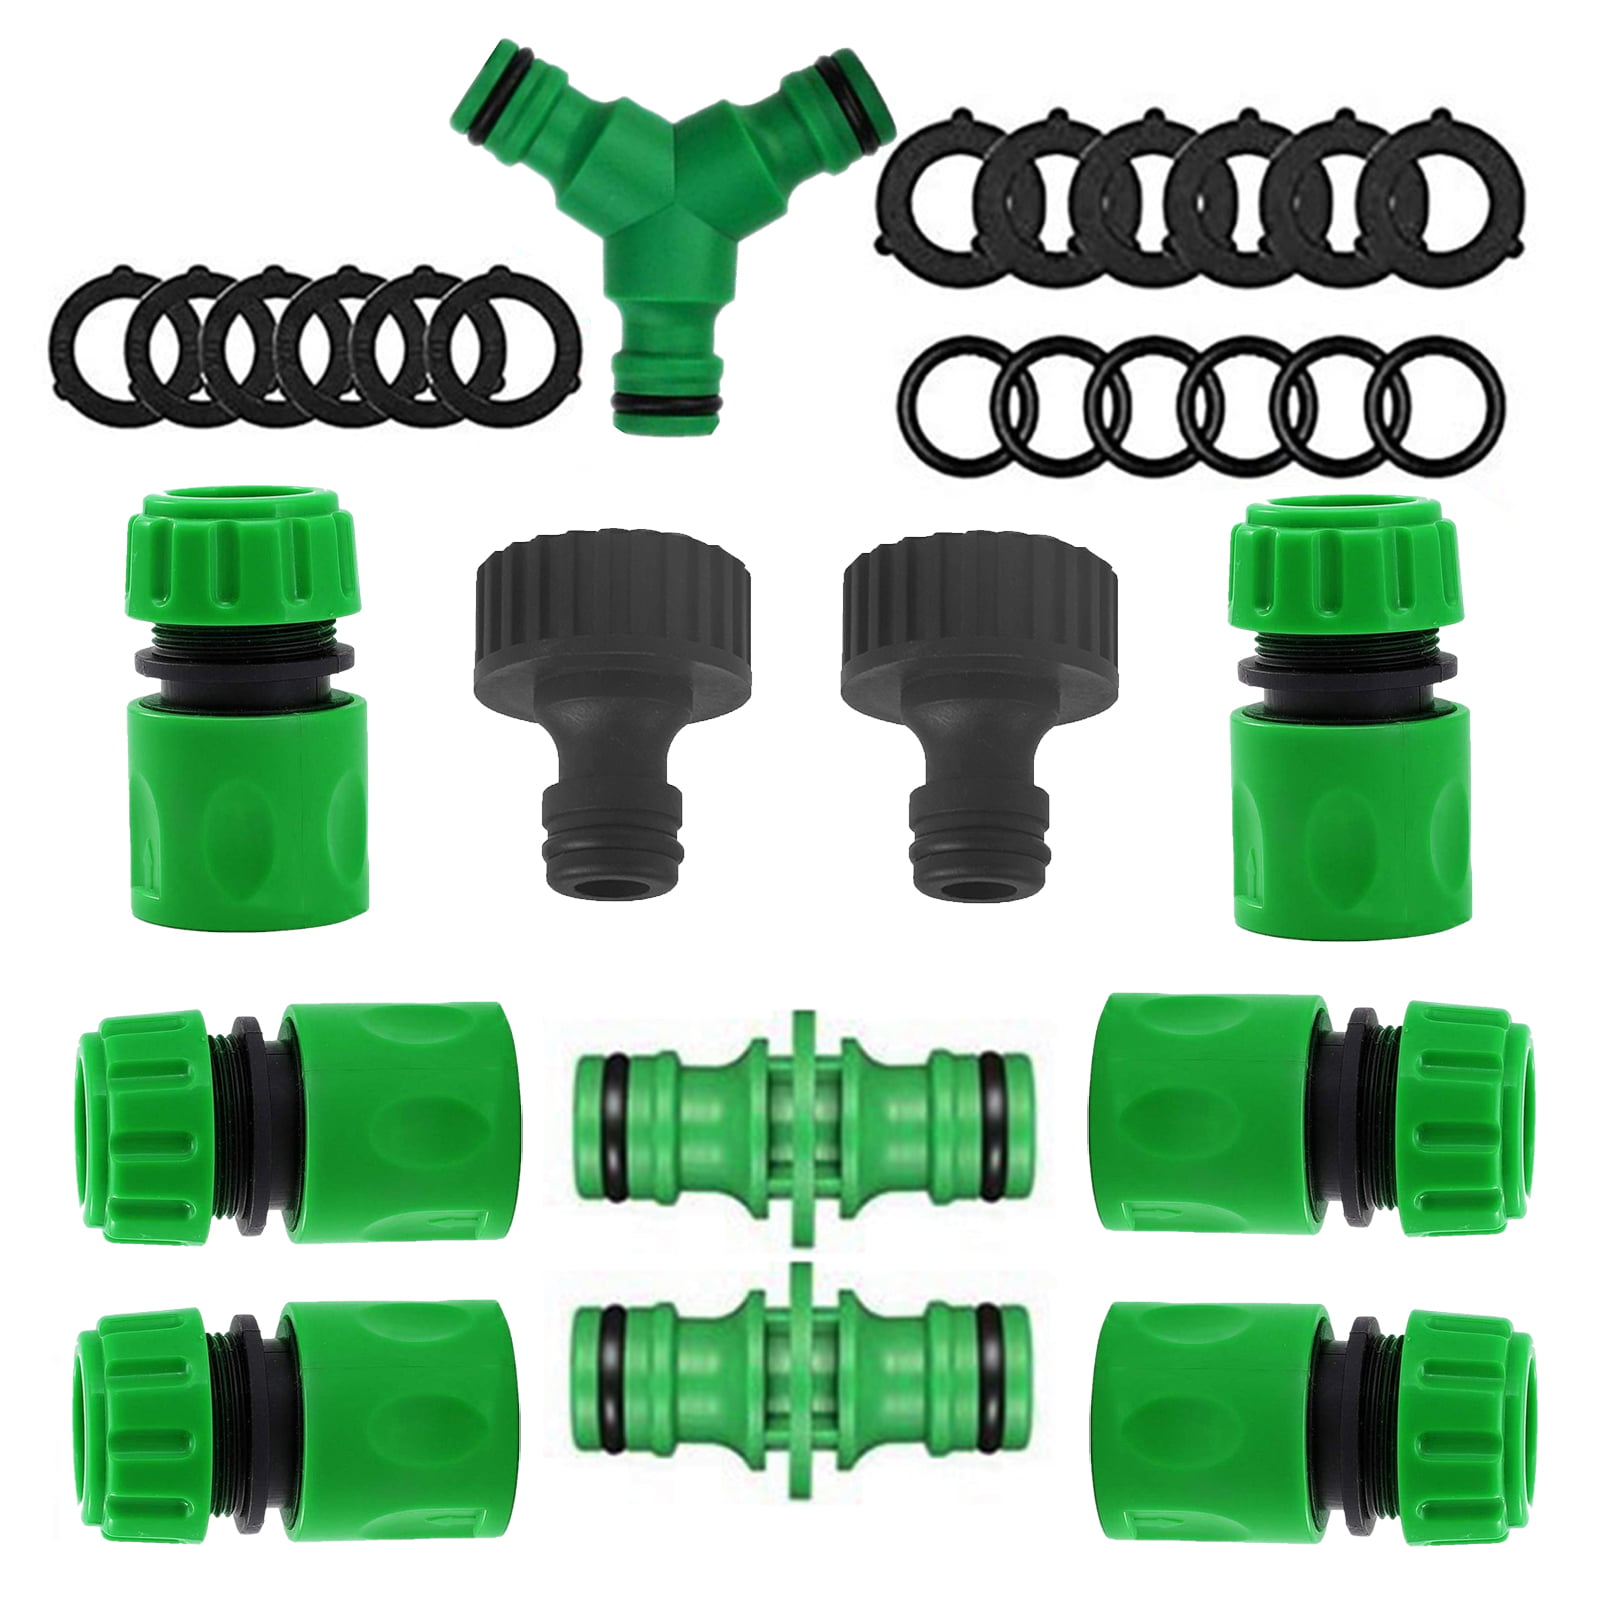 20*1/2inch Garden Hose Connector Adapter Joiner 2 Way Fitting Quick Coupling Kit 